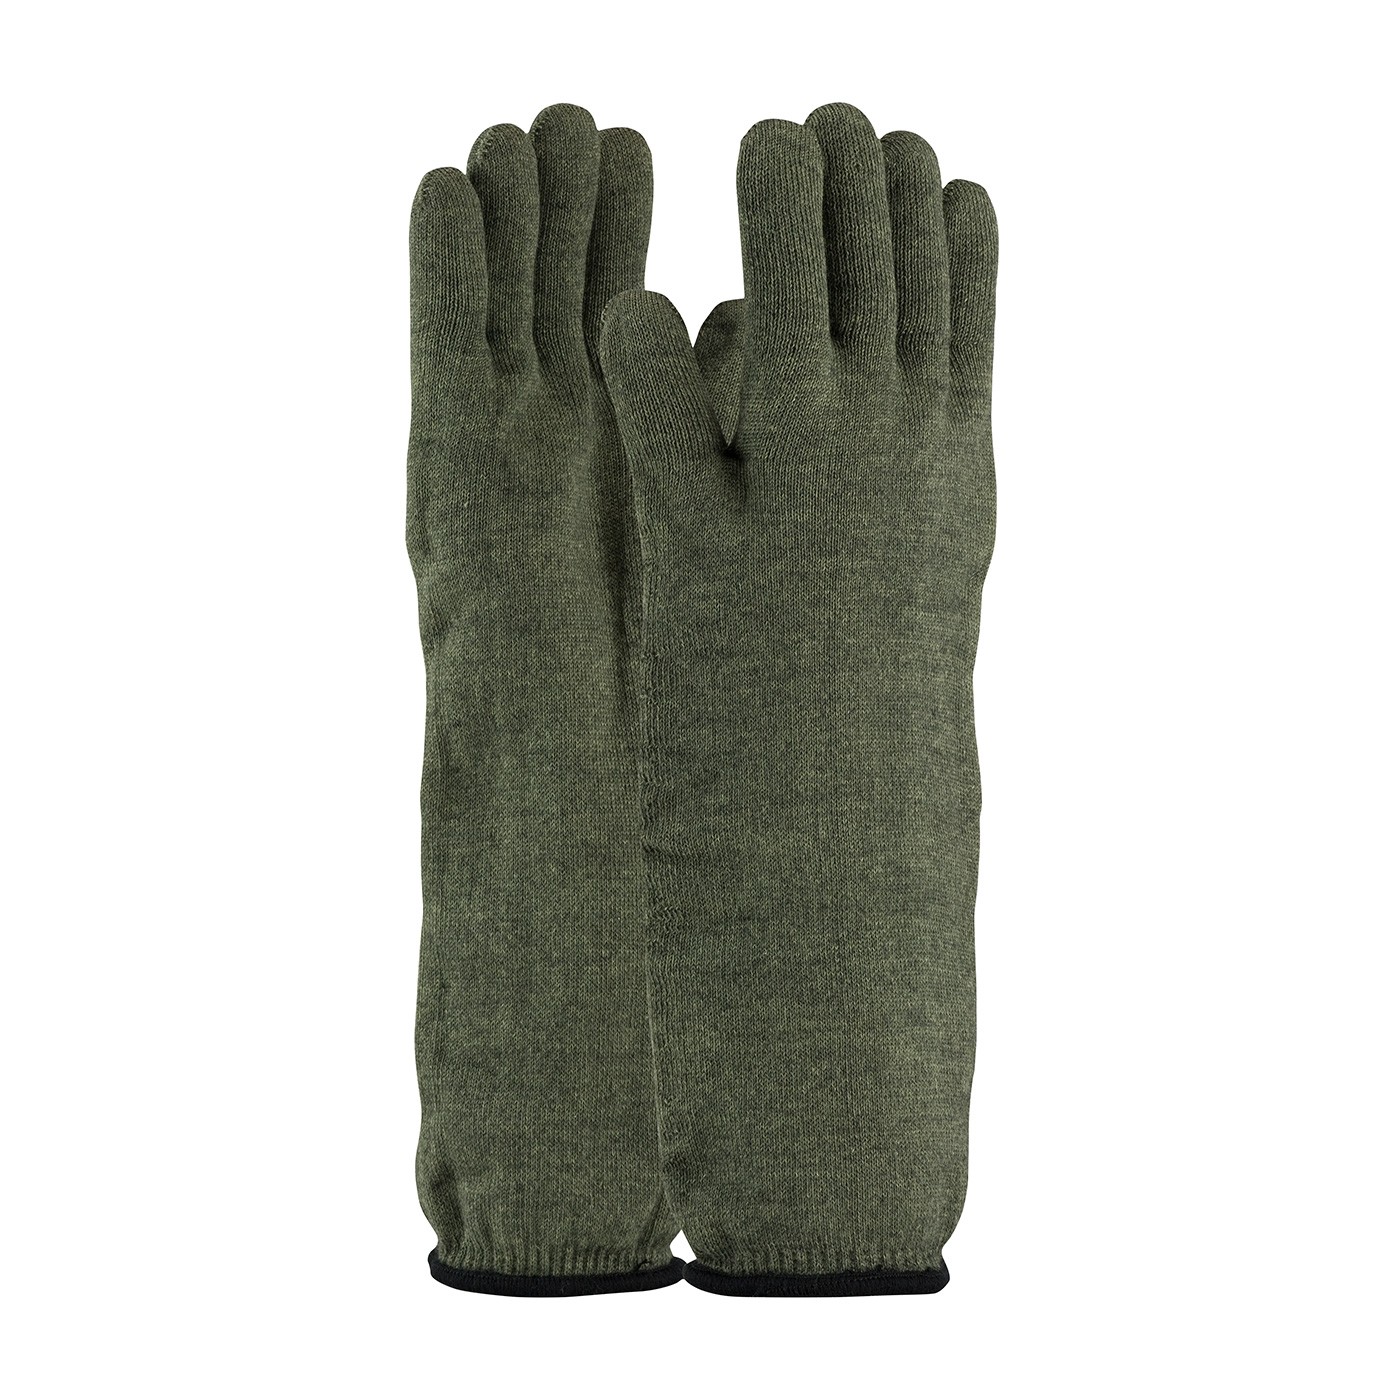 Kut Gard® Kevlar® / Preox Seamless Knit Hot Mill Glove with Cotton Liner - Extended Cuff  (#43-858)